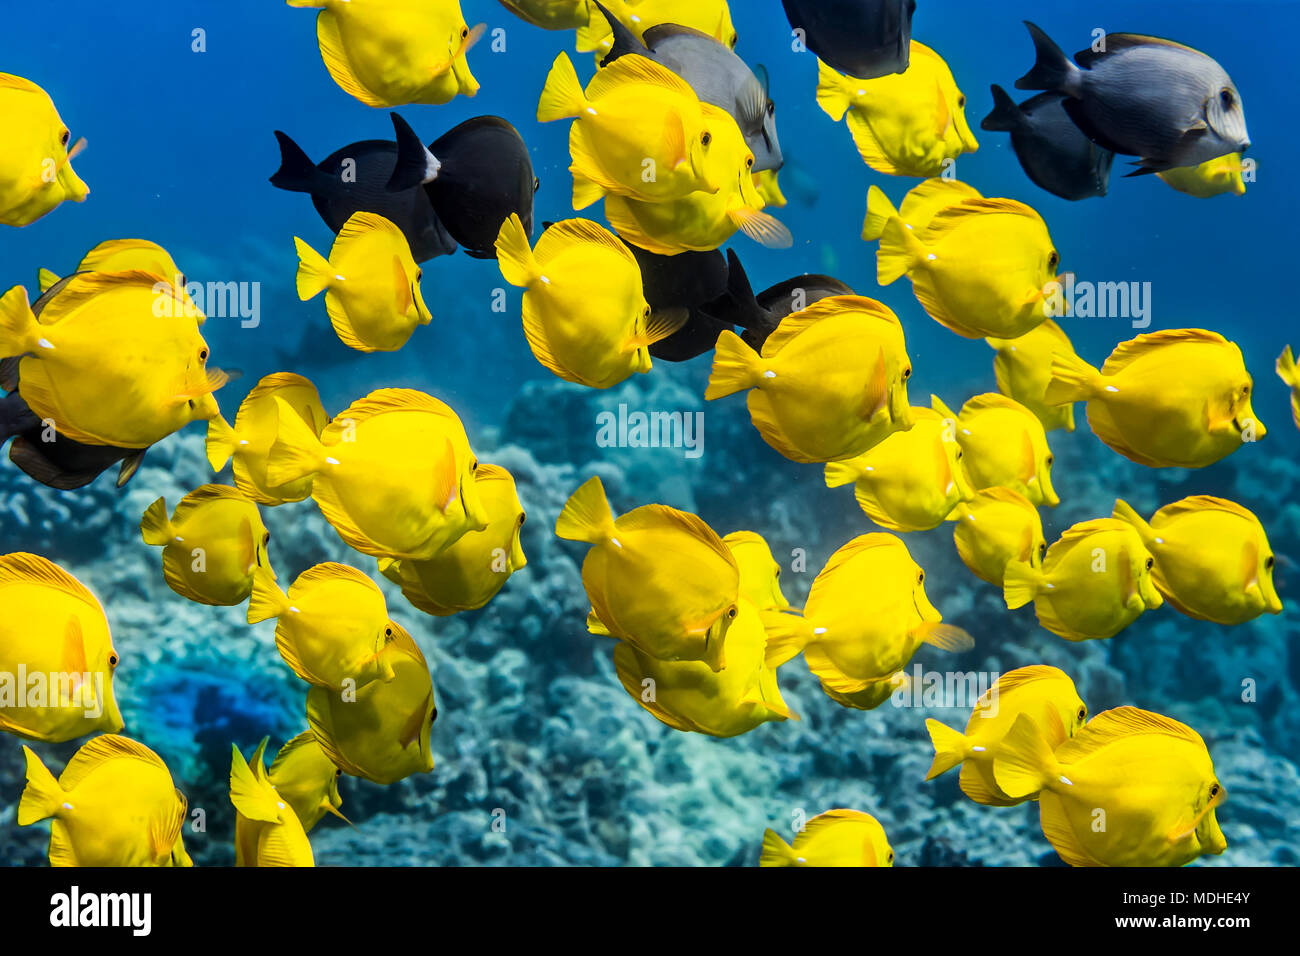 Yellow Tang (Zebrasoma flavescens) with a few Brown Surgeonfish (Acanthurus nigrofuscus) and Ringtail Surgeonfish (Acanthurus blochii)  schooling o... Stock Photo